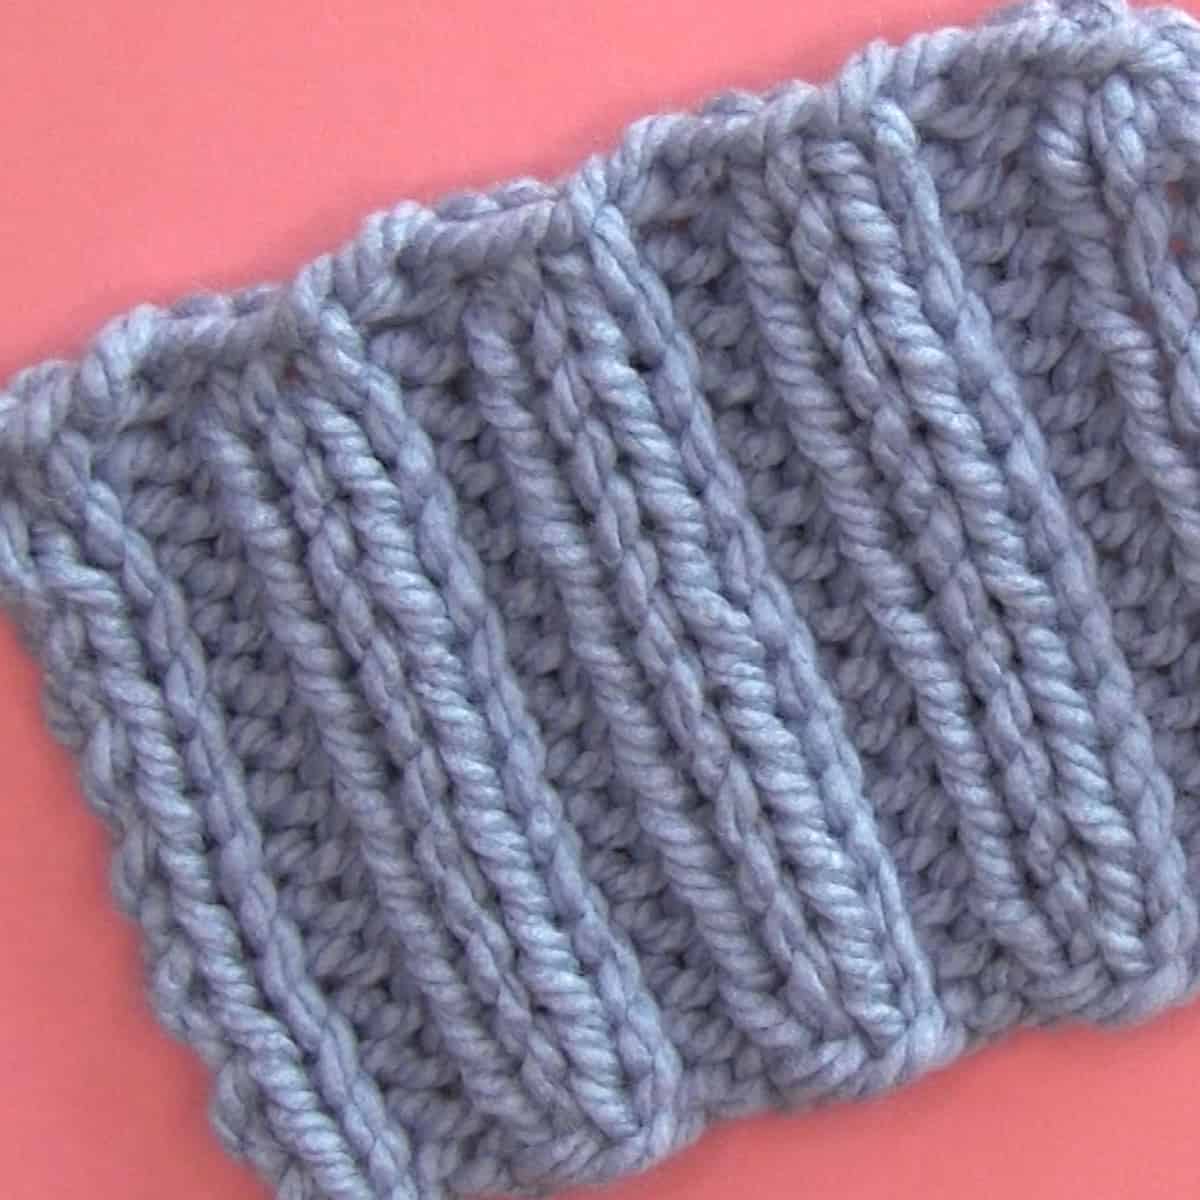 2x2 Rib knit stitch pattern cast off edge in pattern with knitwise and purlwise stitches.